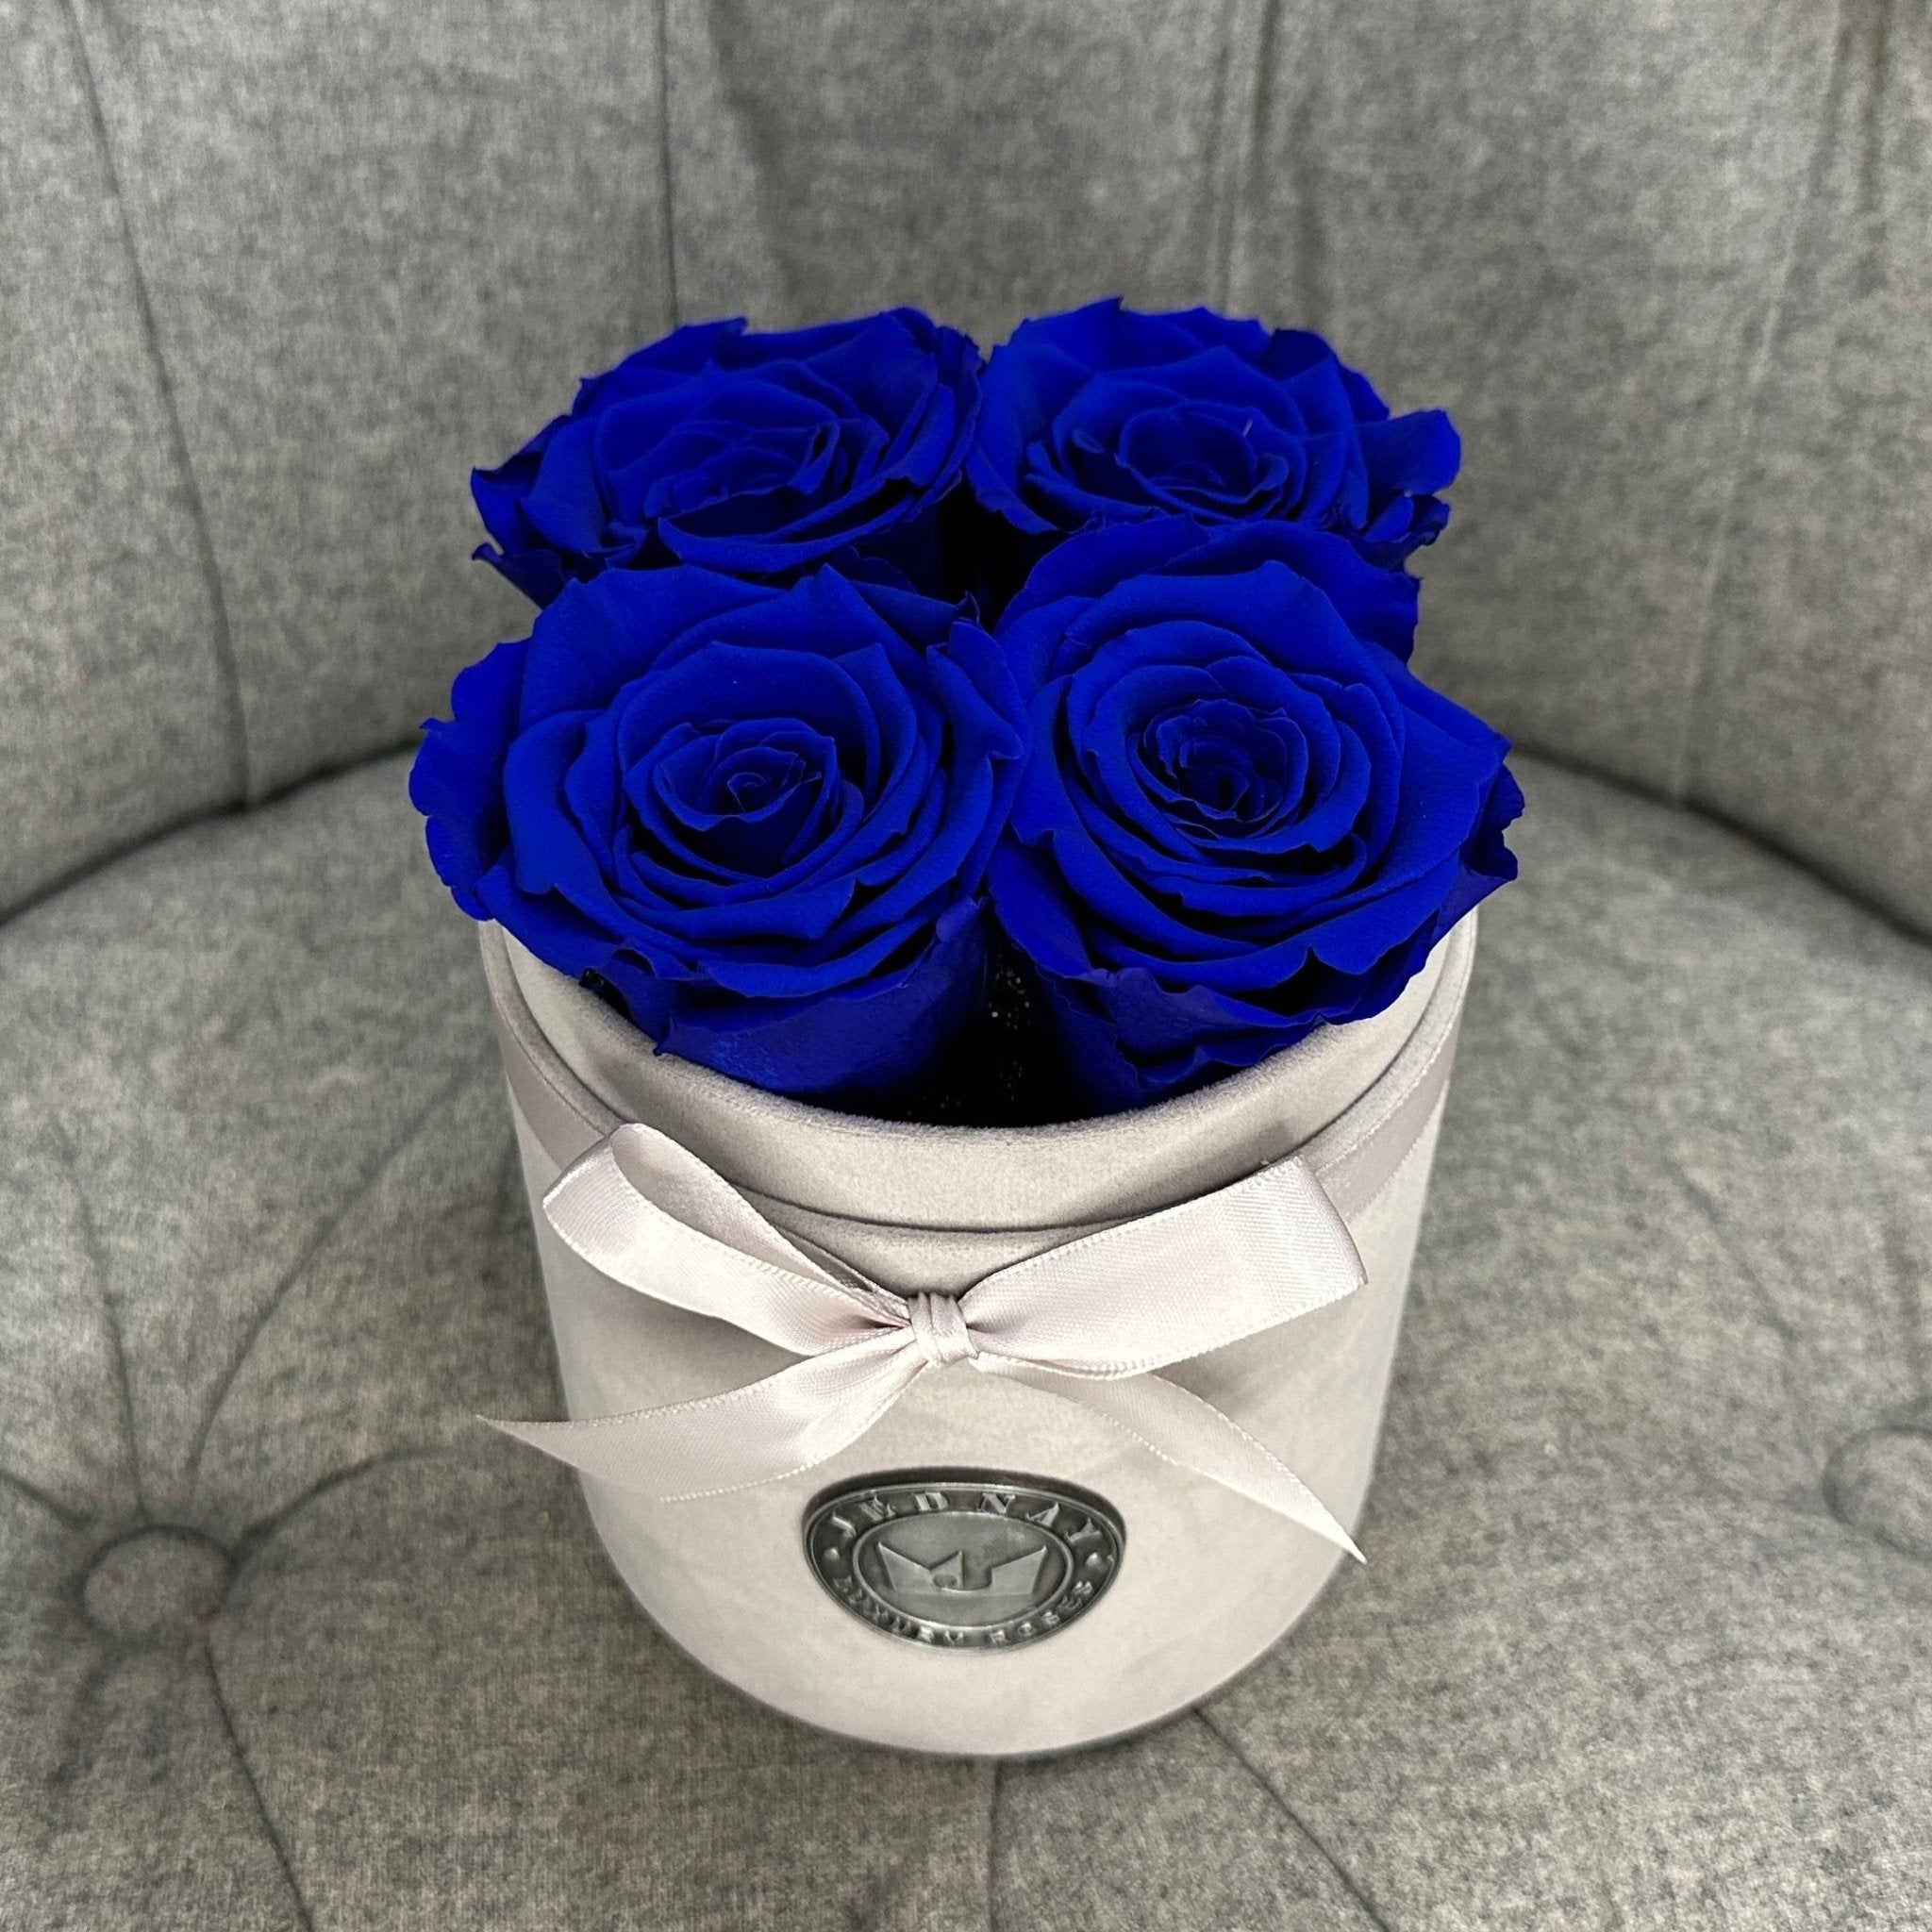 Petite Grey Suede Forever Rose Box - Deep Blue Sea Eternal Roses - Jednay Roses